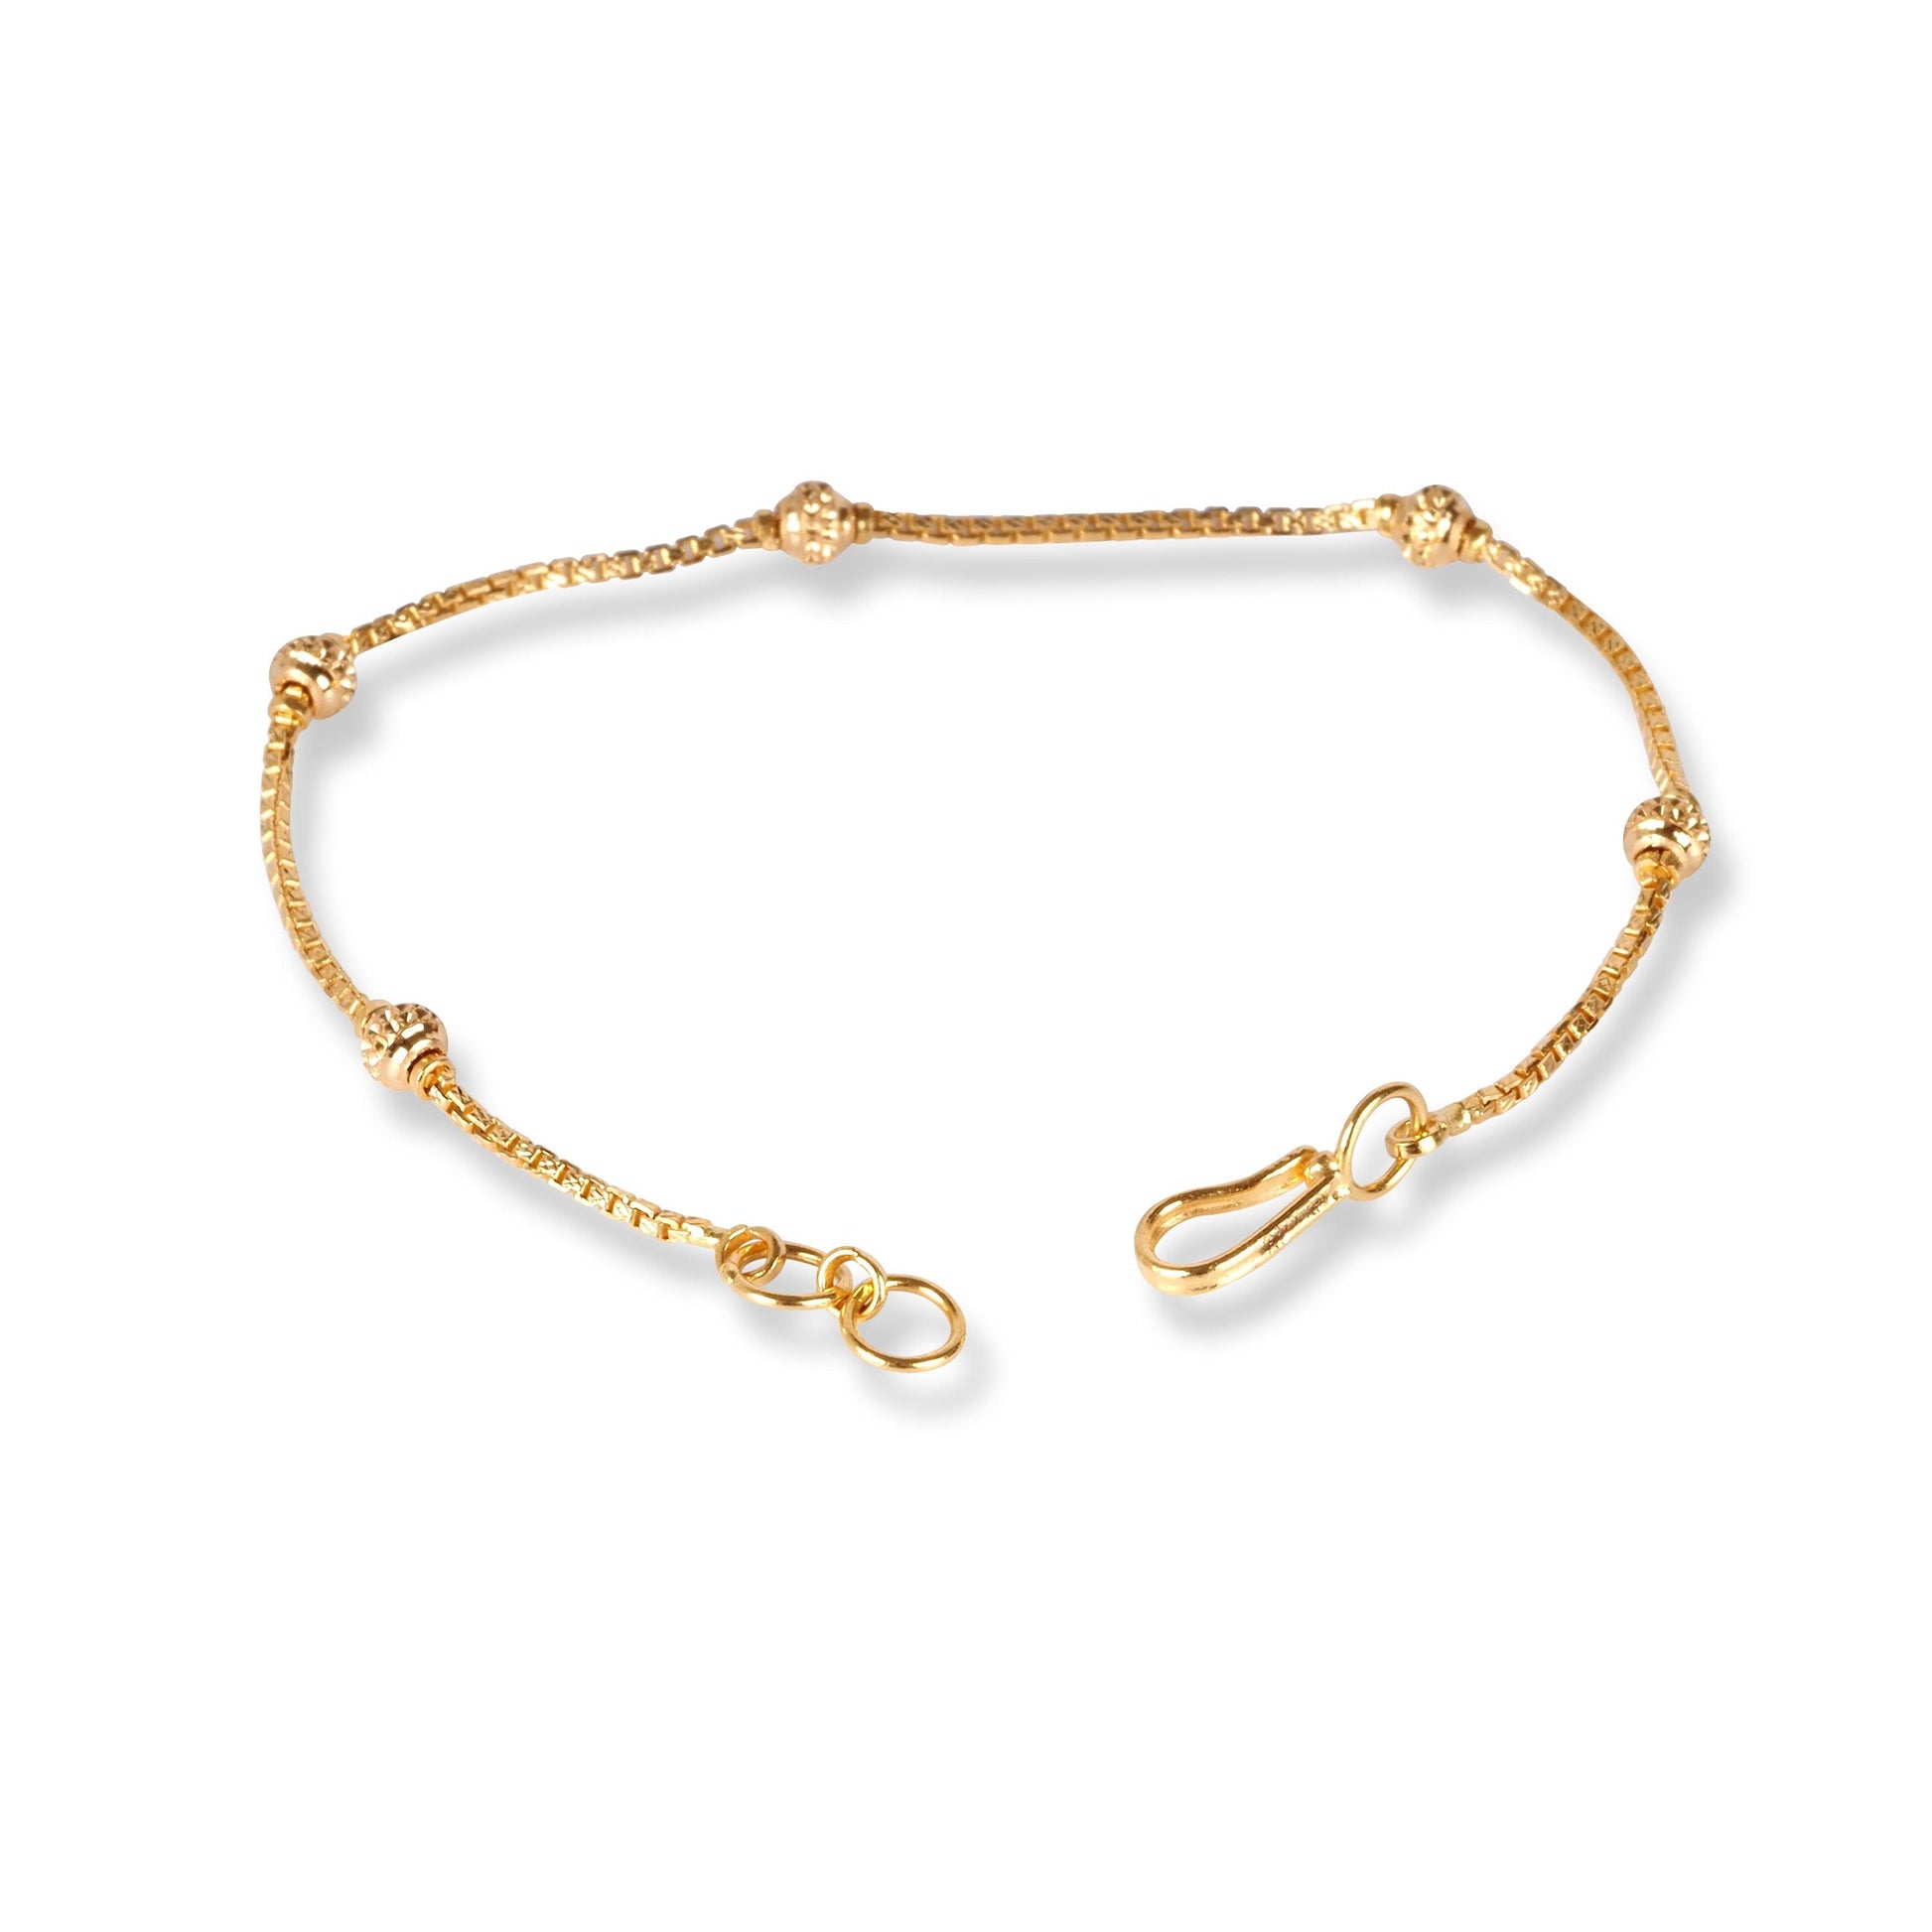 22ct Gold Box Chain Bracelet With Diamond Cut Beads and Hook Clasp LBR-7161 - Minar Jewellers